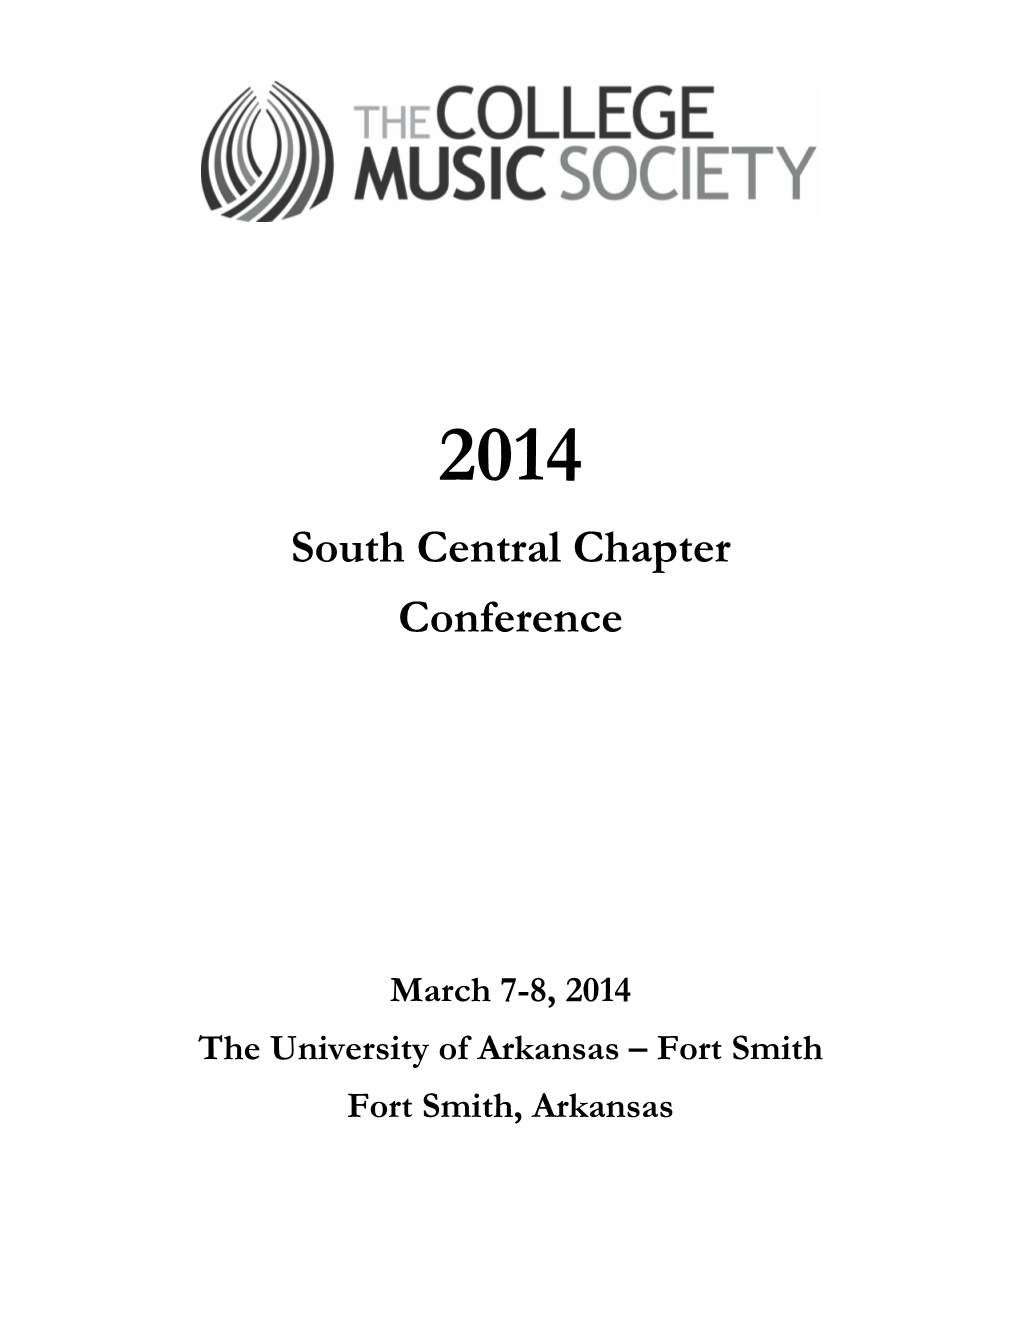 South Central Chapter Conference